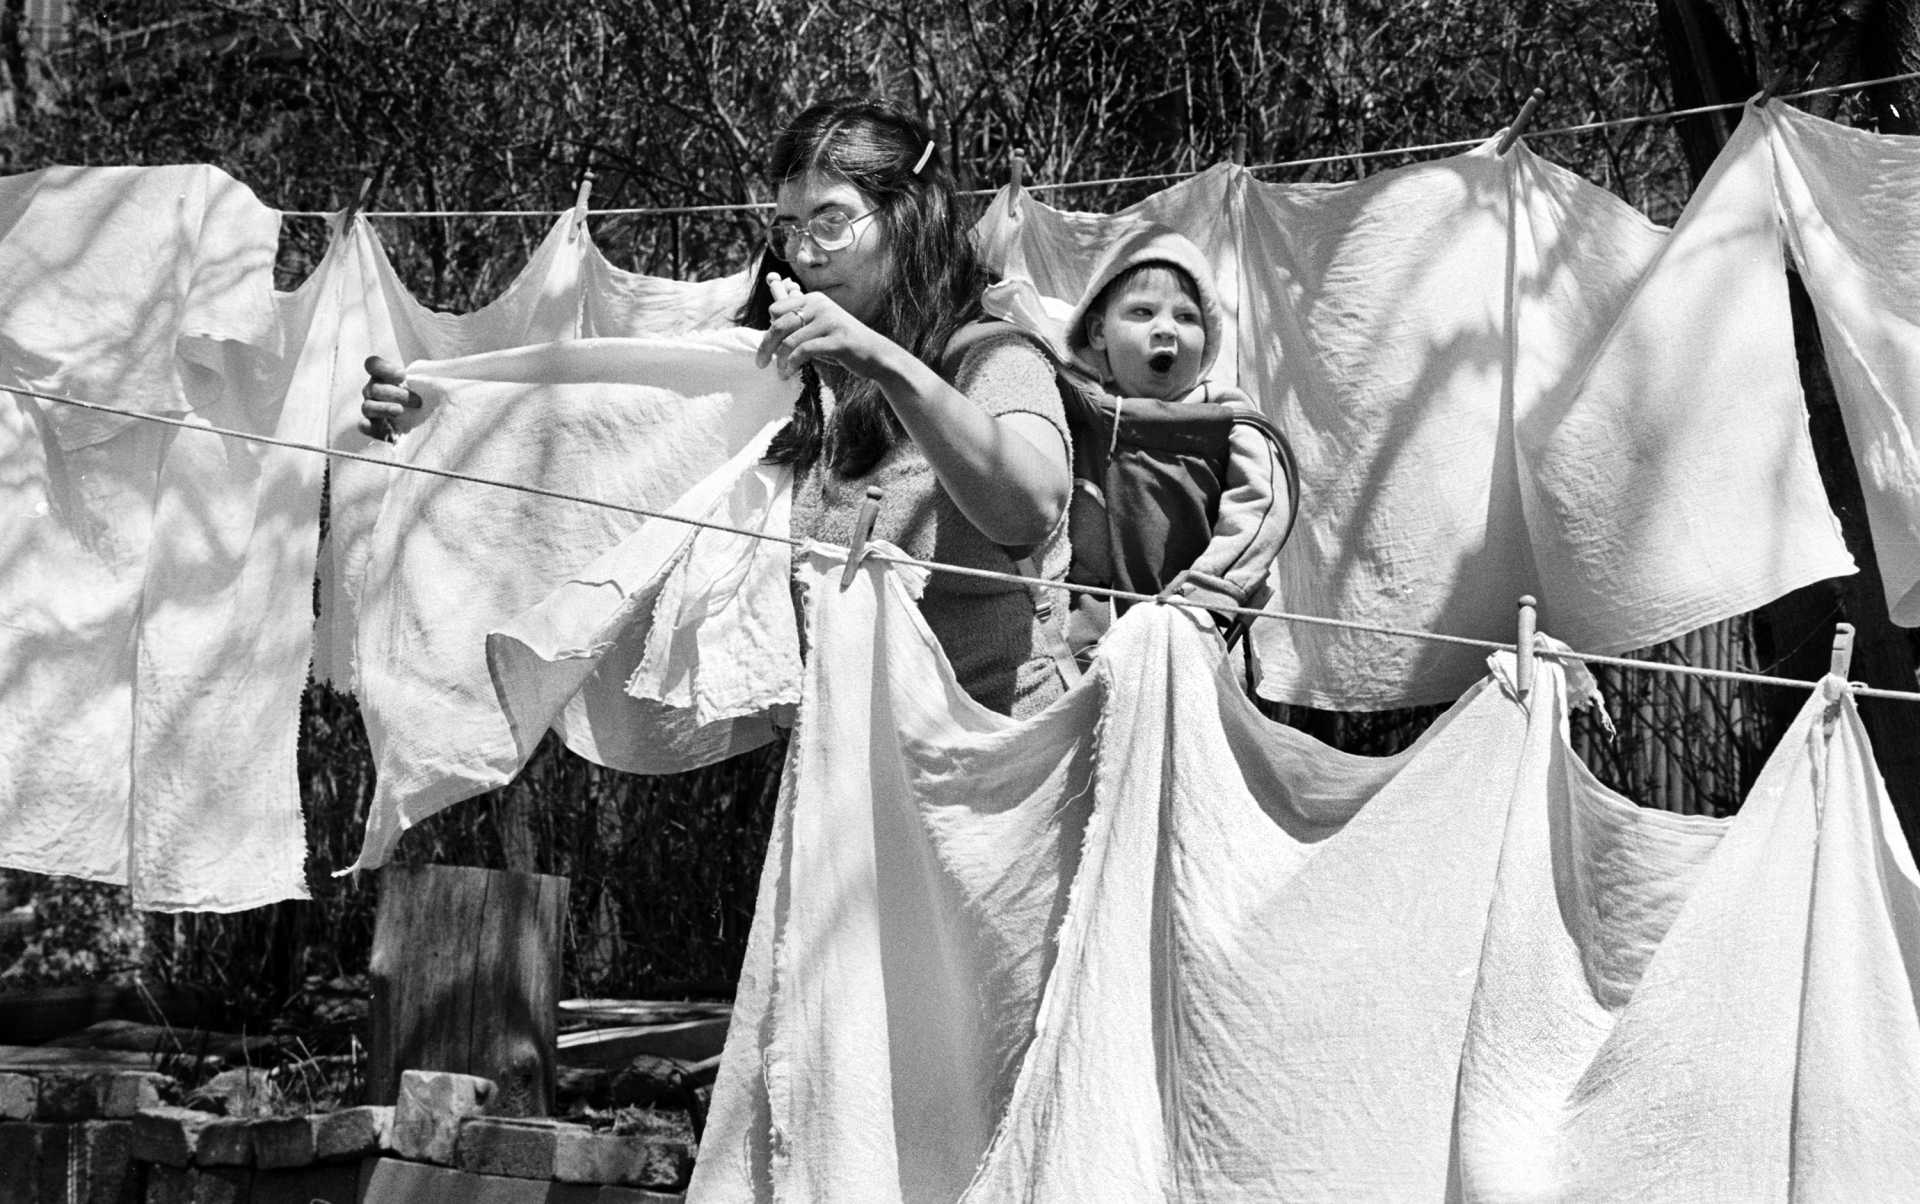 A young mother hangs diapers out to dry. 1980